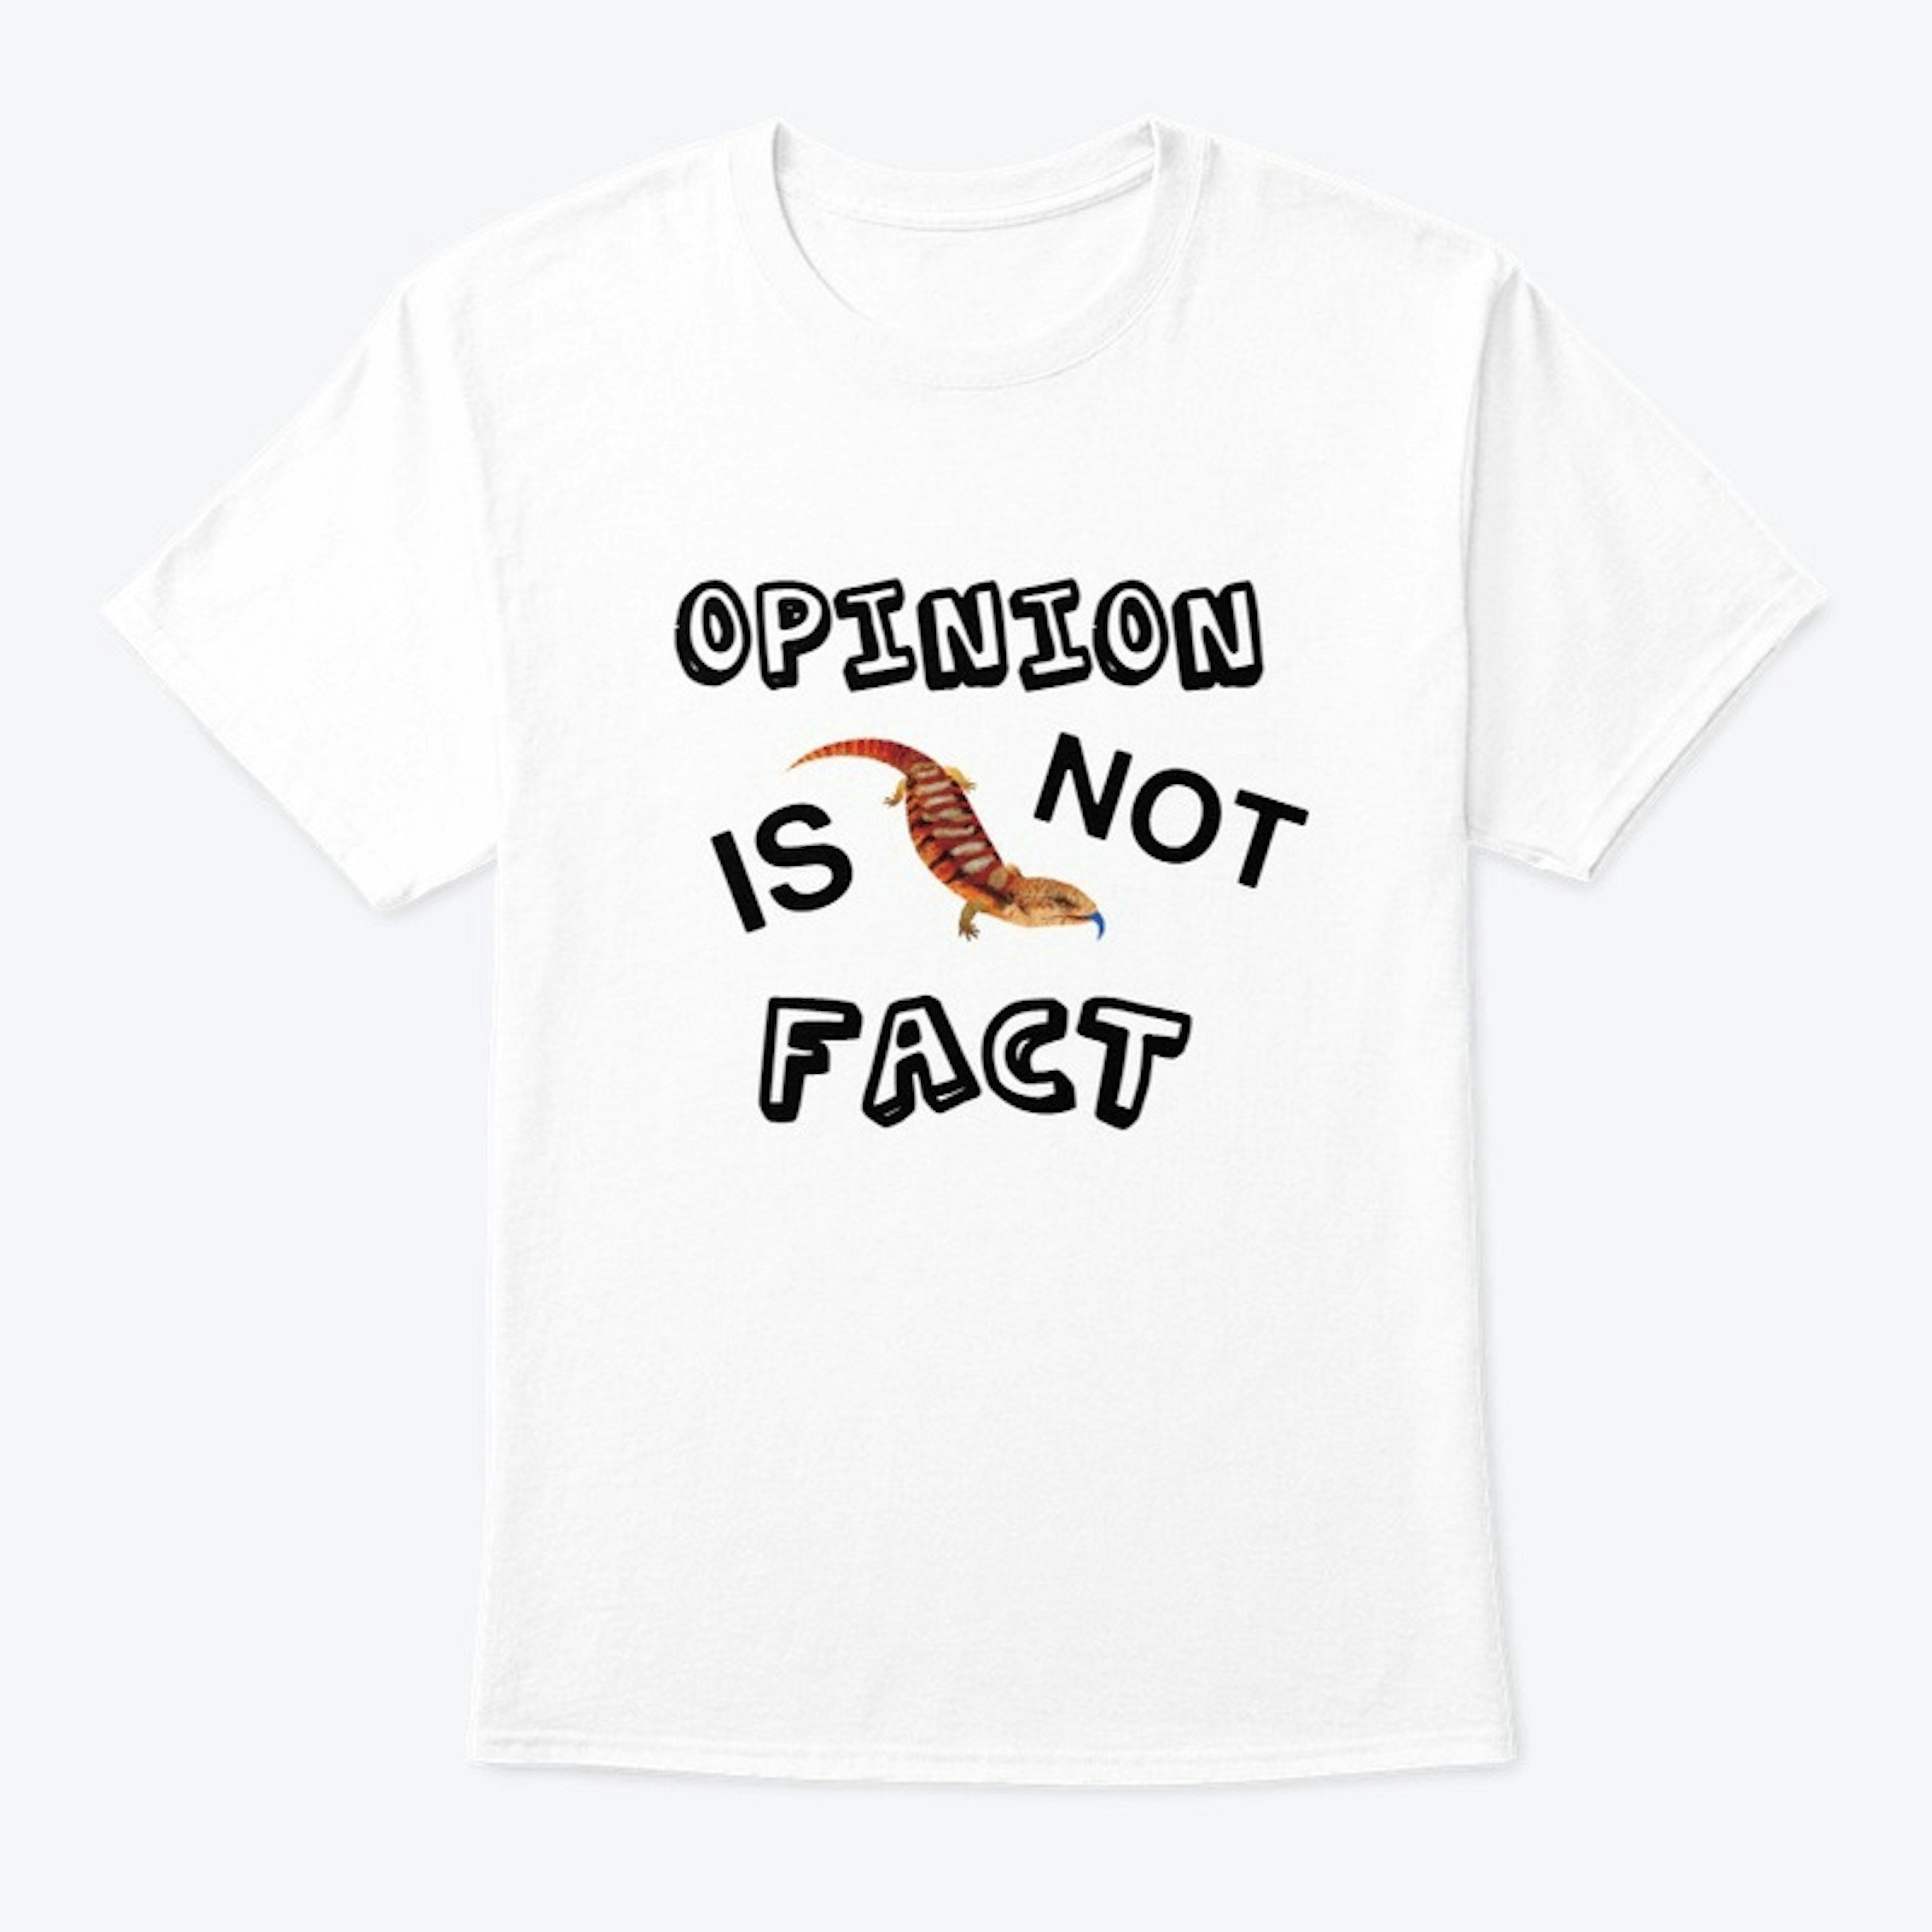 Opinion is NOT Fact!